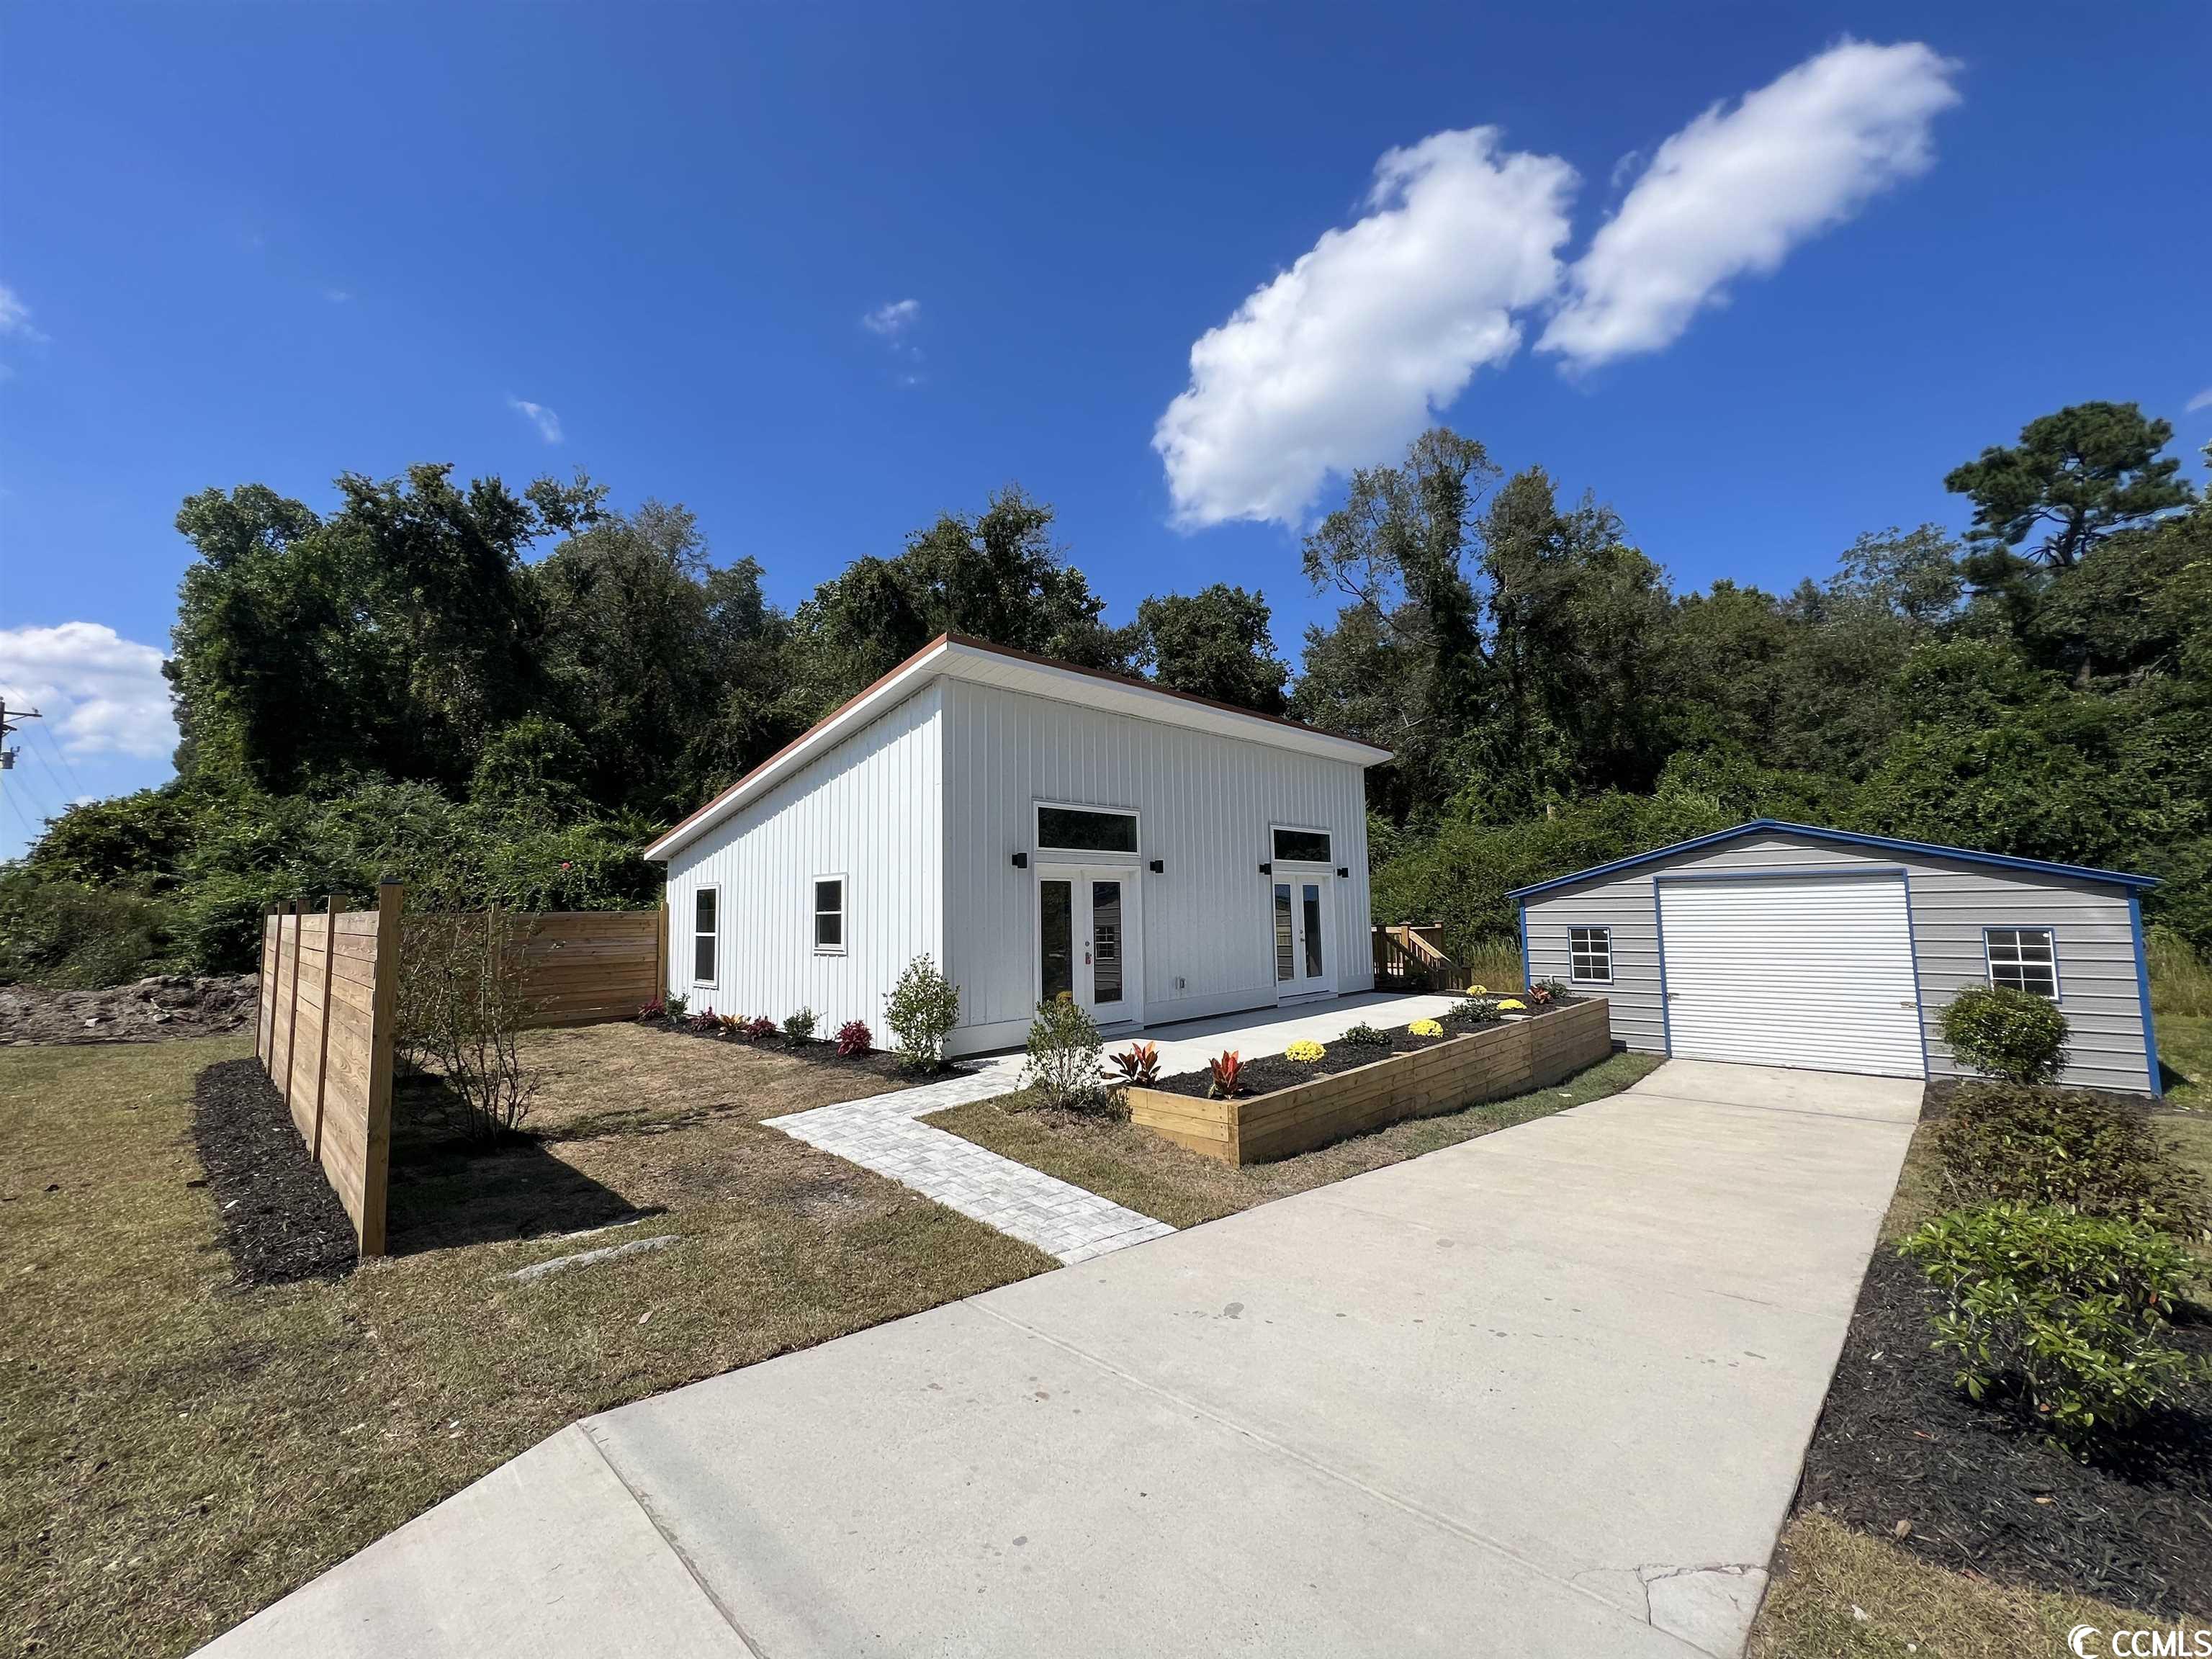 *new construction* this modern-cottage style home is move in ready! 2br/1ba with detached oversized garage/workshop measuring 24'x31' with insulated roof, 50 amp electrical service panel, 4000 psi concrete, and oversized 10'x10' door. great for rv storage etc. due to the density of the concrete. driveway leading to garage includes installed french drains. exterior of the home boasts white metal vertical siding with a stunning copper colored metal roof! 7'x31' front porch as well as a 16'x16' private back deck. modern-style privacy fence that will compliment the home's contemporary aesthetic, landscaping consist of sod, stone, mulch and a variety of plants and shrubbery. when entering, enjoy high ceilings and lots of natural light through several windows. open floor plan in the kitchen/dining/living area. all appliances included! (brand new stainless steel lg dishwasher, refrigerator, microwave, 5-burner smooth top range, and full size stackable washer & dryer). porcelain tile flooring throughout, white quartz countertops in kitchen and bathroom, sleek cabinetry with soft close drawers in white. kitchen will have 42in upper cabinets for additional storage. led lighting throughout, all hardware in matte black finish, 5 panel bedroom and bathroom doors. bathroom will offer stunning custom tile 6'x6" walk-in shower with beautiful waterfall tile accent and solid glass half wall entry. bathroom sink/cabinet has frameless anti-fog led lighted mirror. heat & air provided by 1.5 ton mini-split system and ceiling fans in each room. entire home is built with 2'x6' construction and upgraded insulation. do not miss this opportunity to own a brand new home with no hoa! located directly off hwy 90, close to coastal carolina university, downtown conway, hospitals, shopping, and minutes to the beach! schedule a tour today.